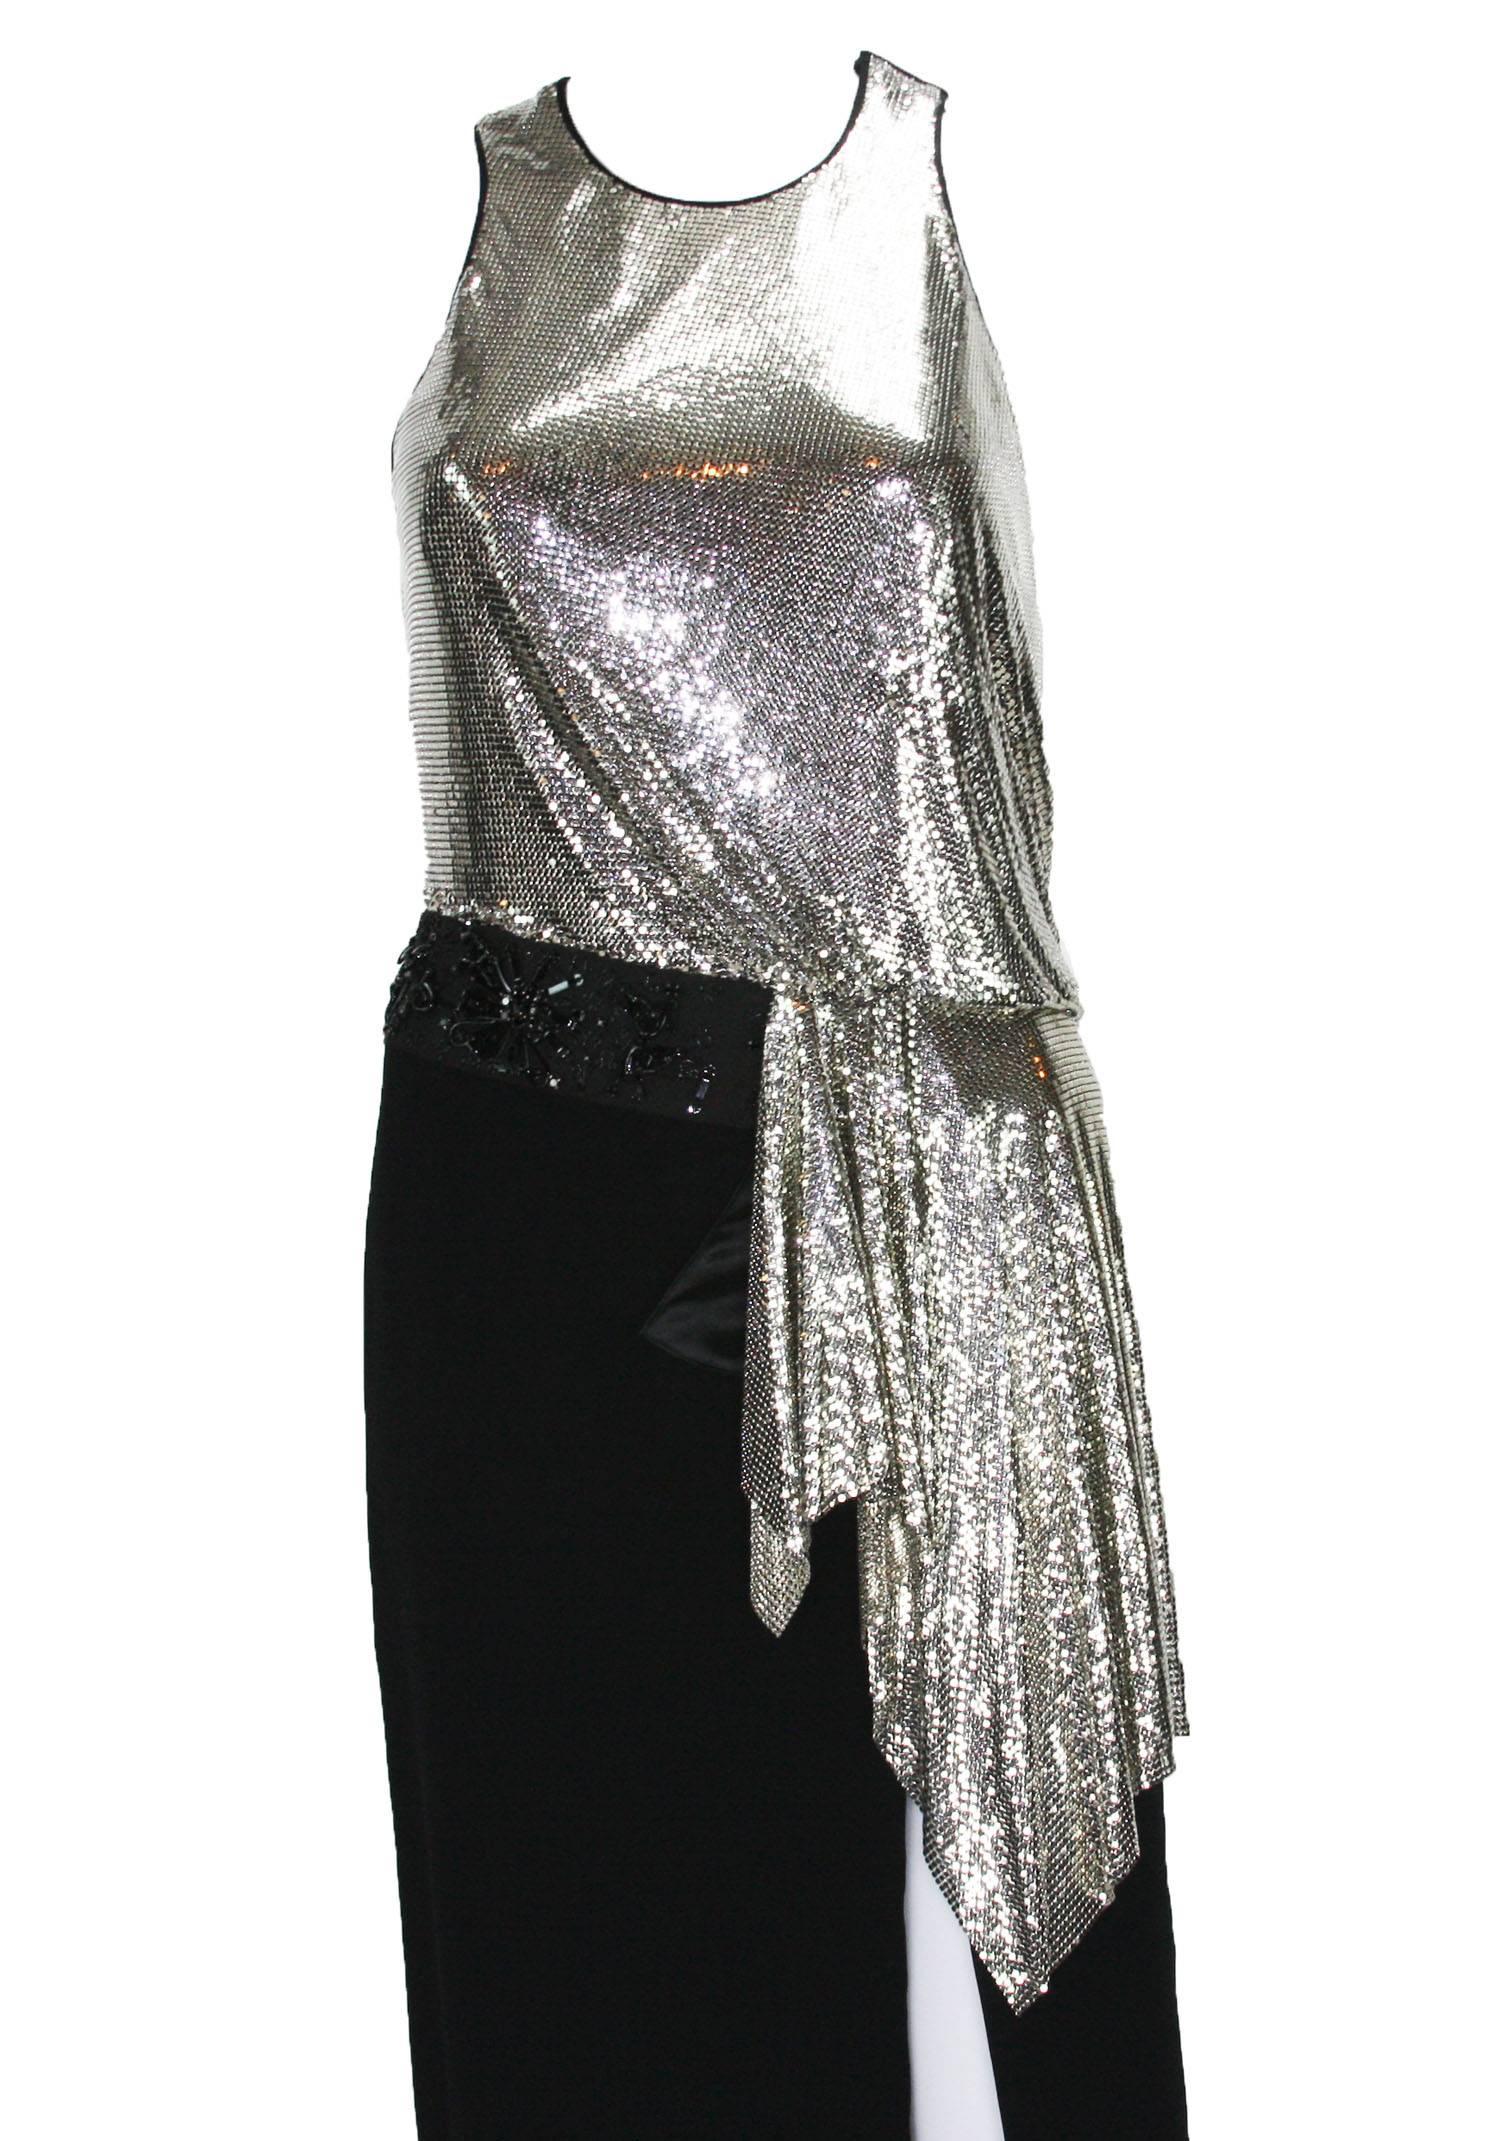 New Versace Silver Metallic Mesh Cut Out Black High Slit Gown It sizes 42 For Sale 3